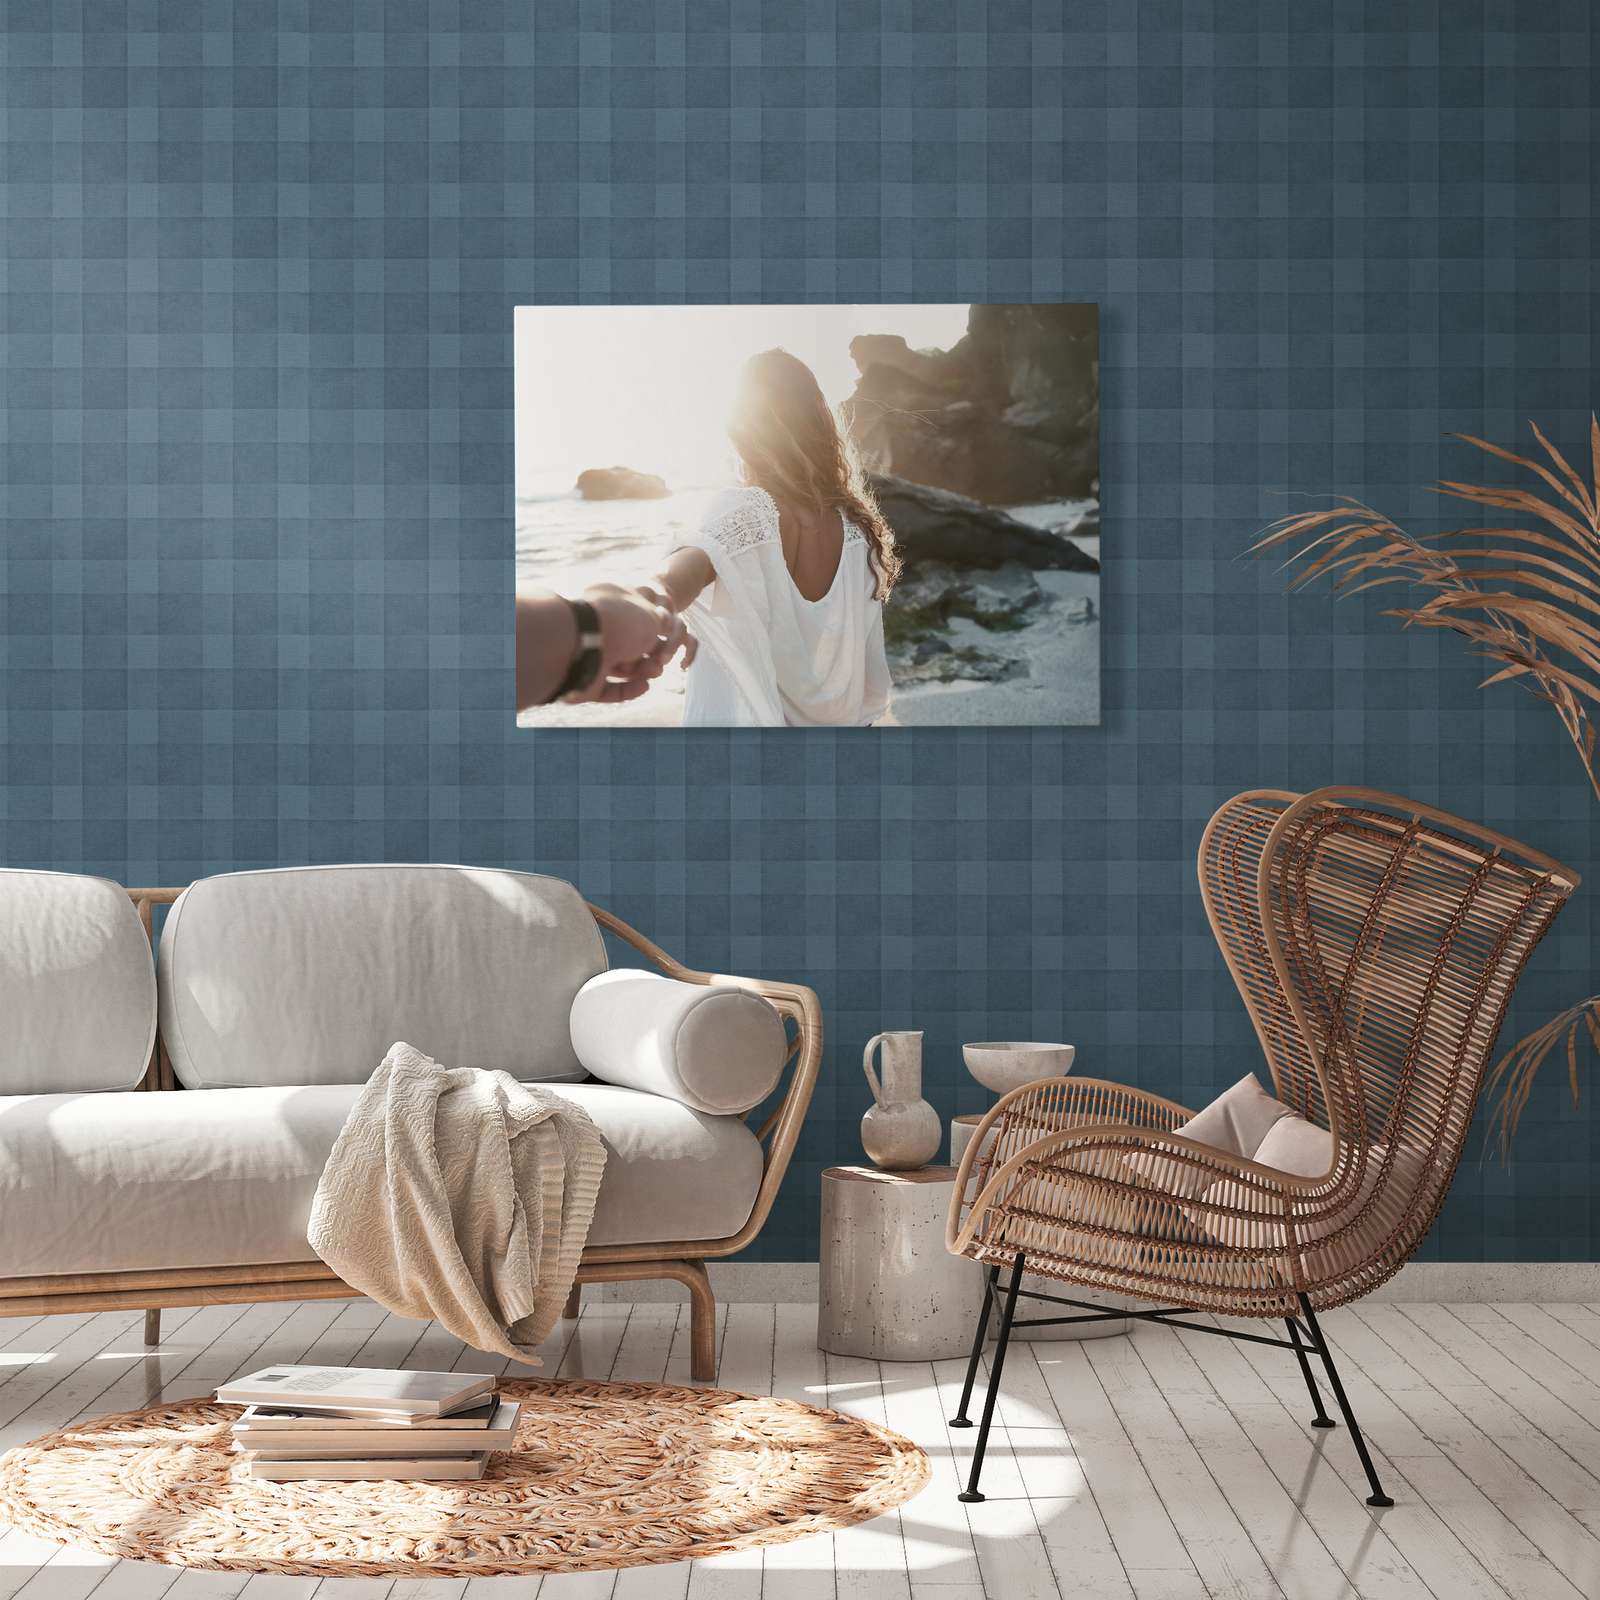             PVC-free wallpaper with graphic check pattern - blue
        